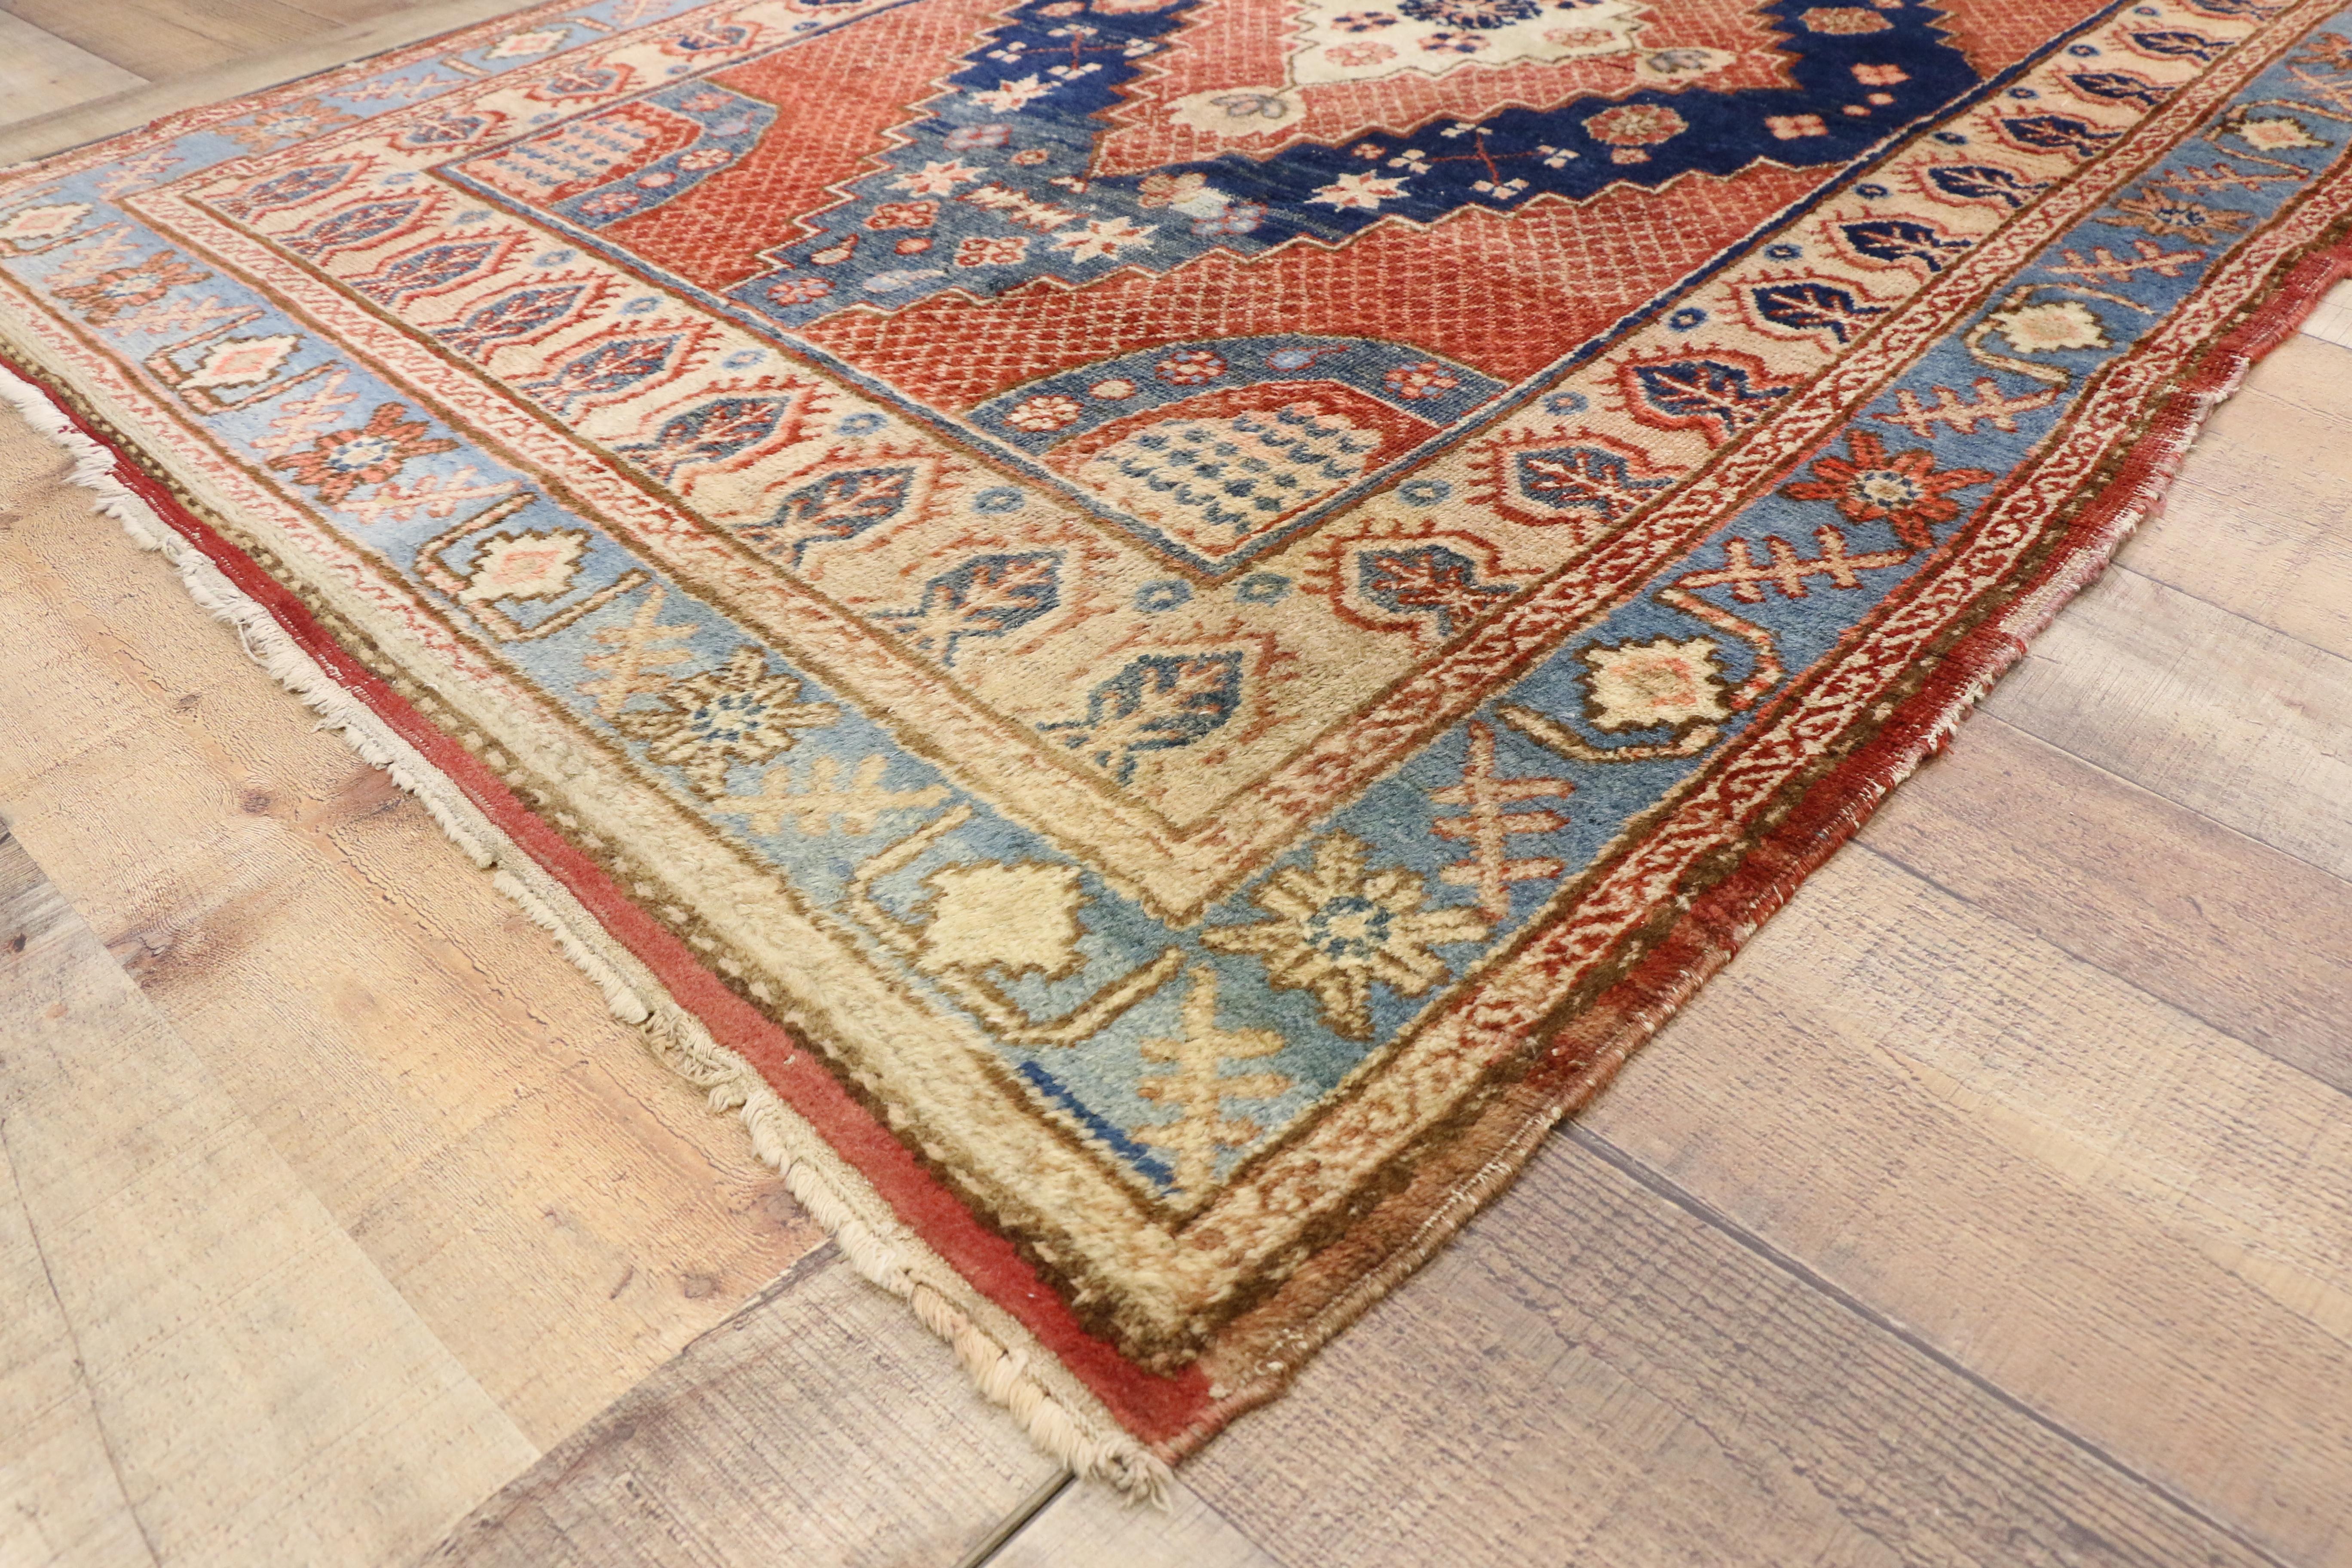 74455 Antique Persian Hamadan rug, Entry or Foyer Rug. Regal and sumptuous, this hand knotted wool antique Persian Hamadan rug displays a beautiful design in luxurious warm colors and cool hues. Emanating grace and comfort, this antique Persian rug